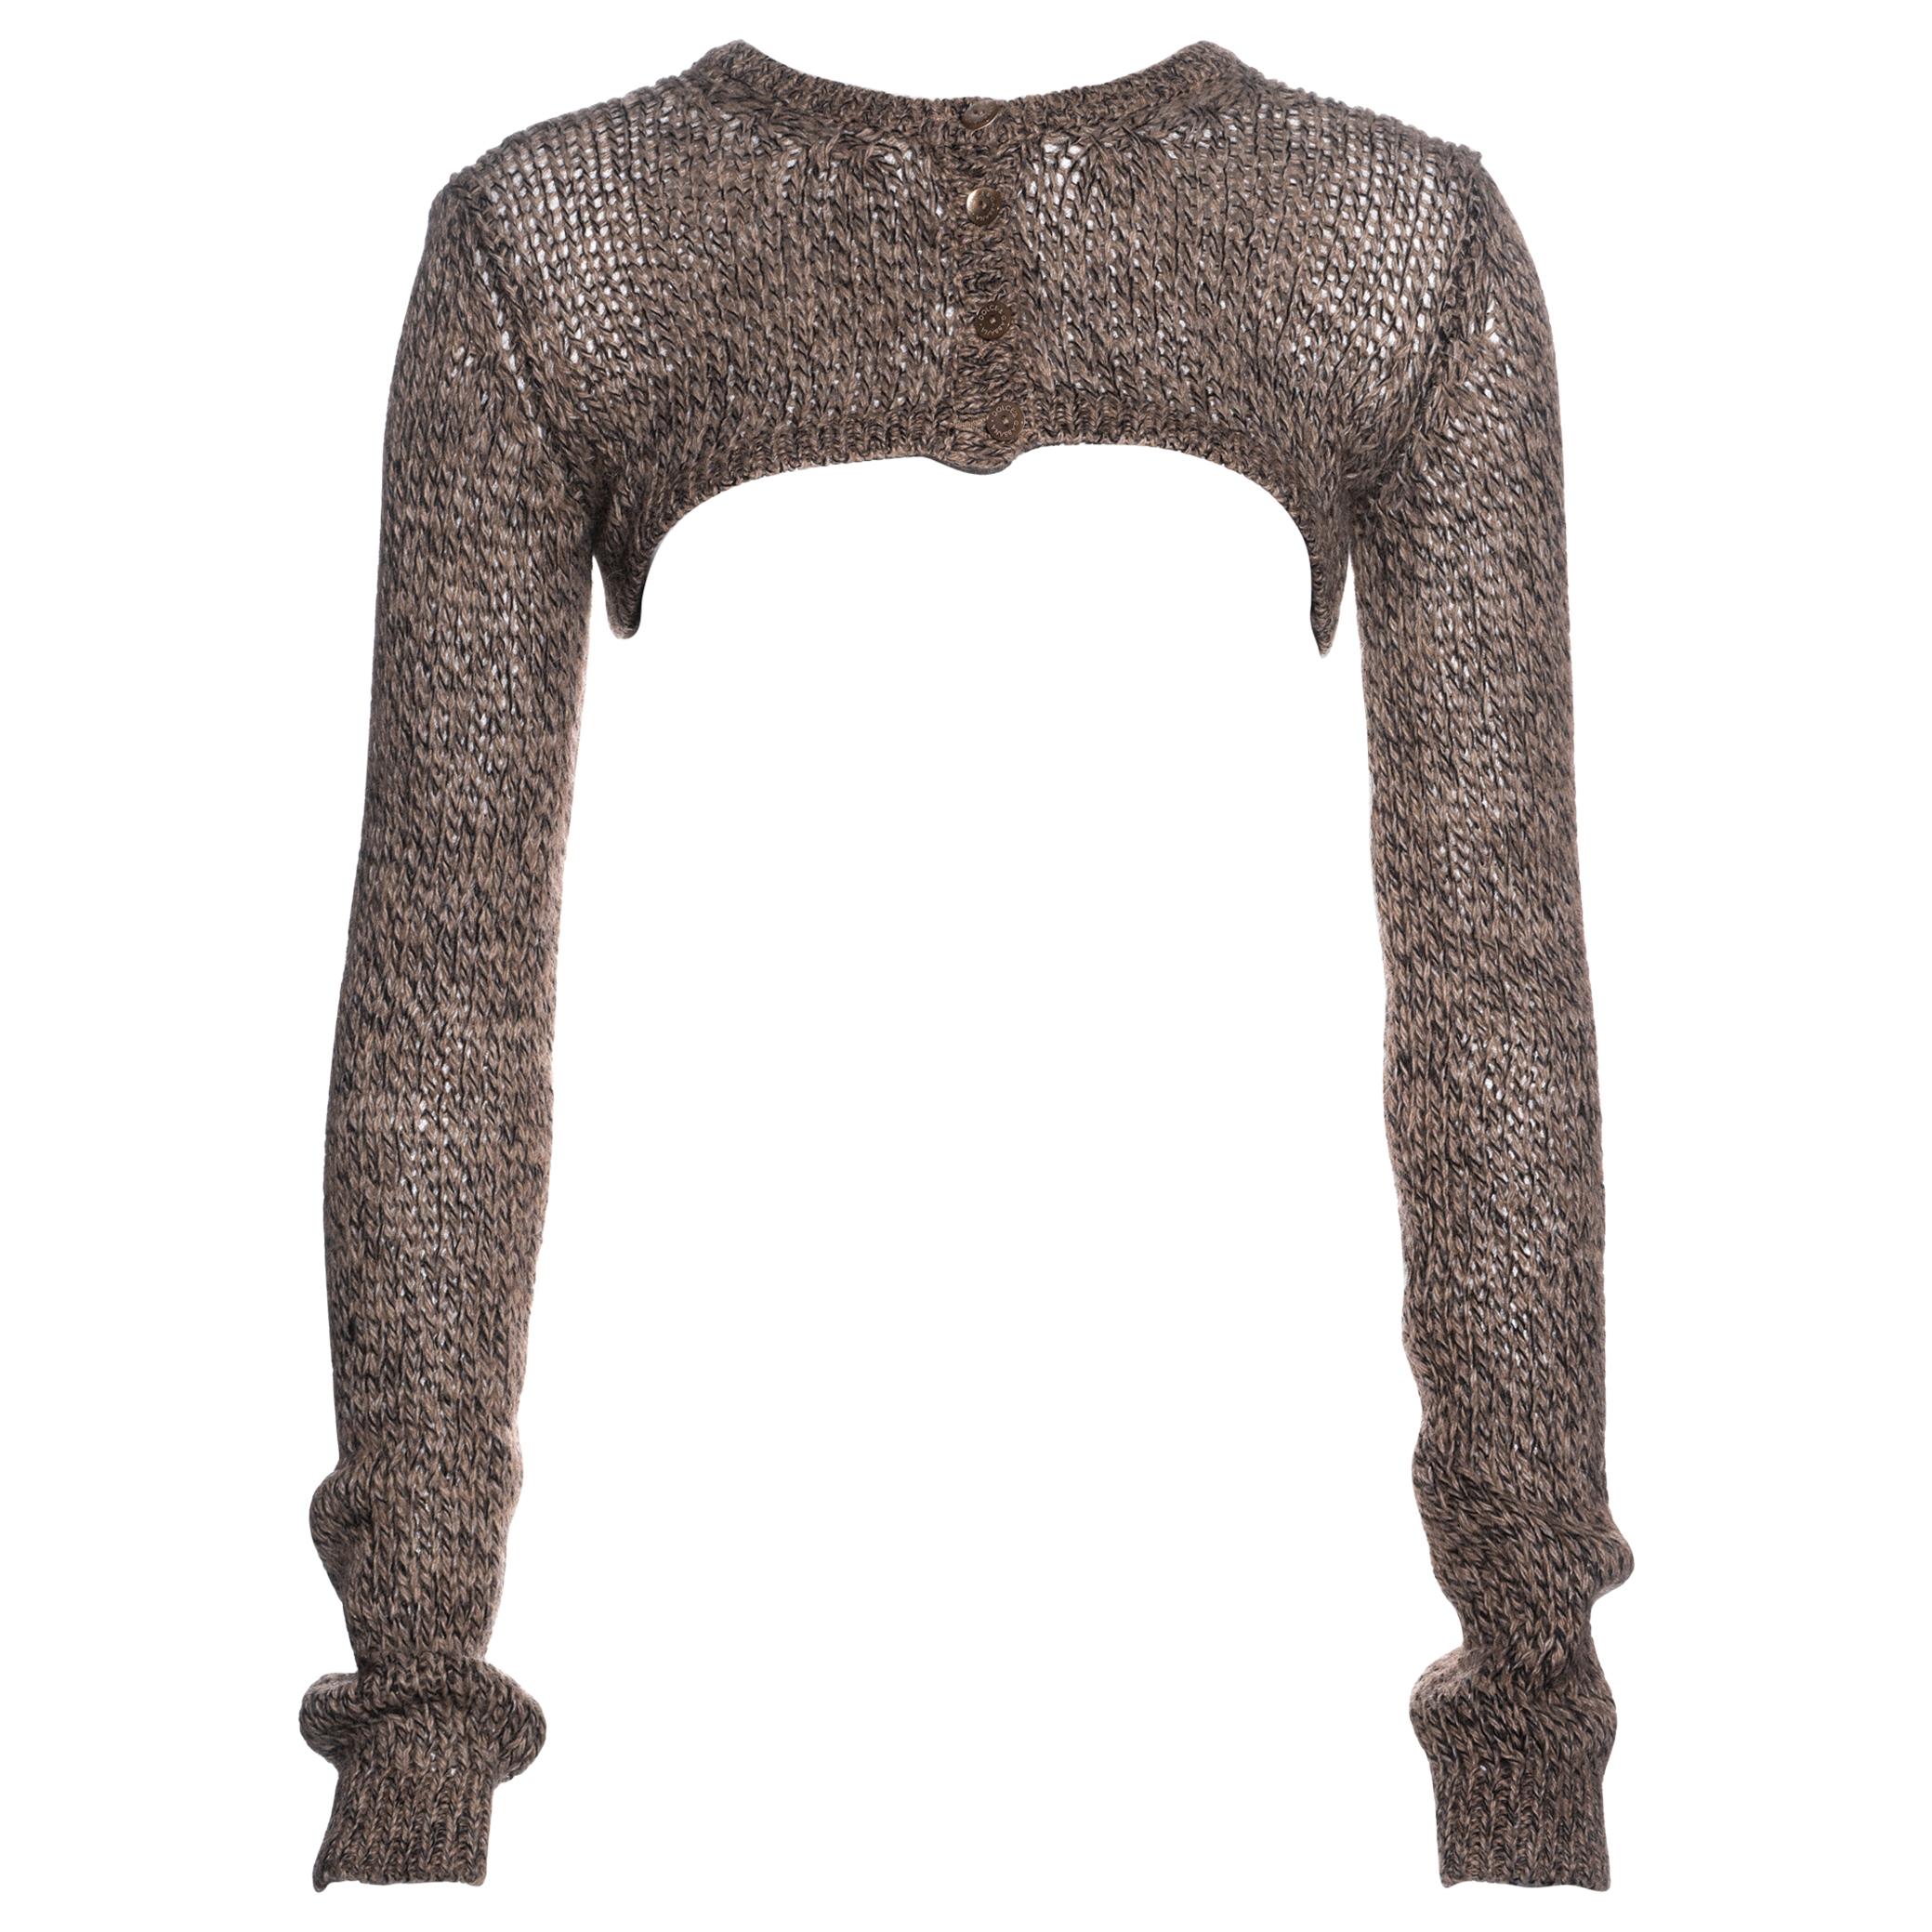 Dolce & Gabbana knitted oatmeal wool cropped long sleeve cardigan, ss 1999